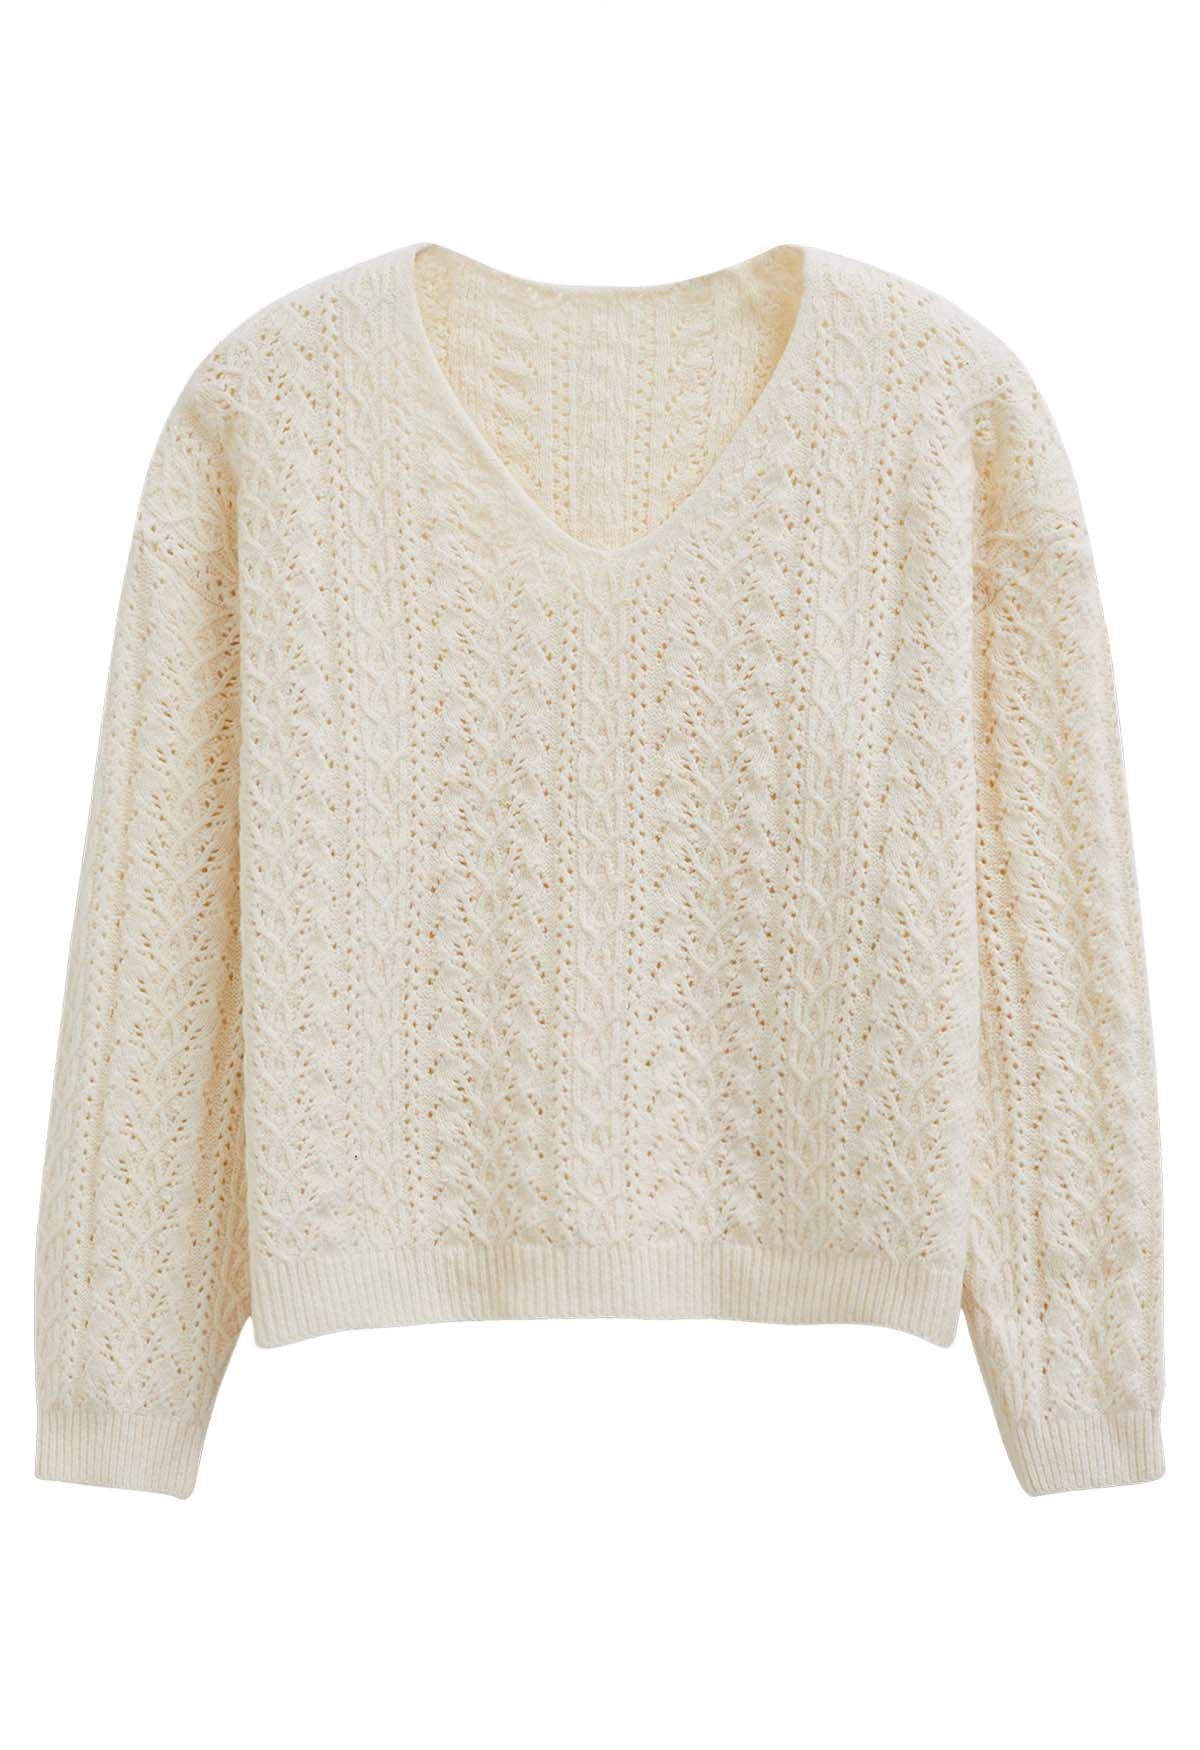 Sheer Aesthetic Cream Pointelle Knit Pullover Sweater Top